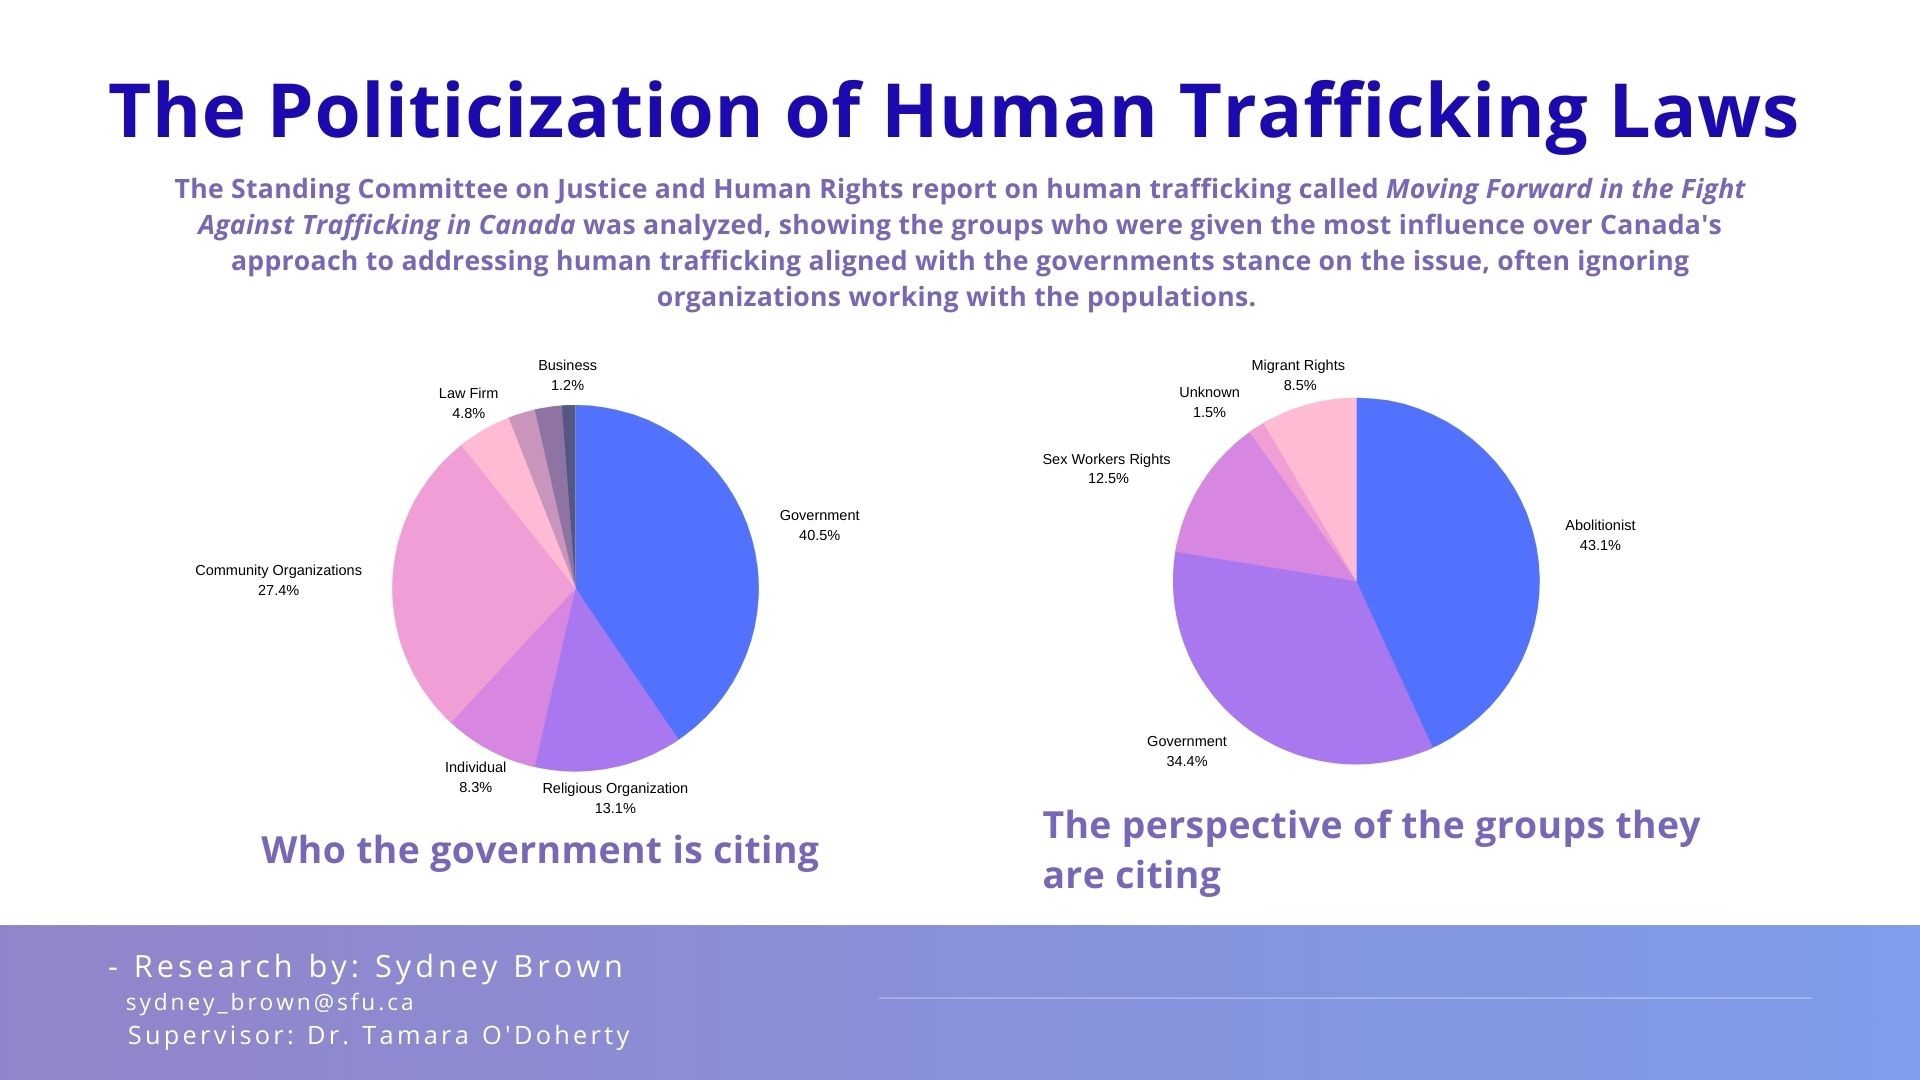 The Politicization of Human Trafficking Laws